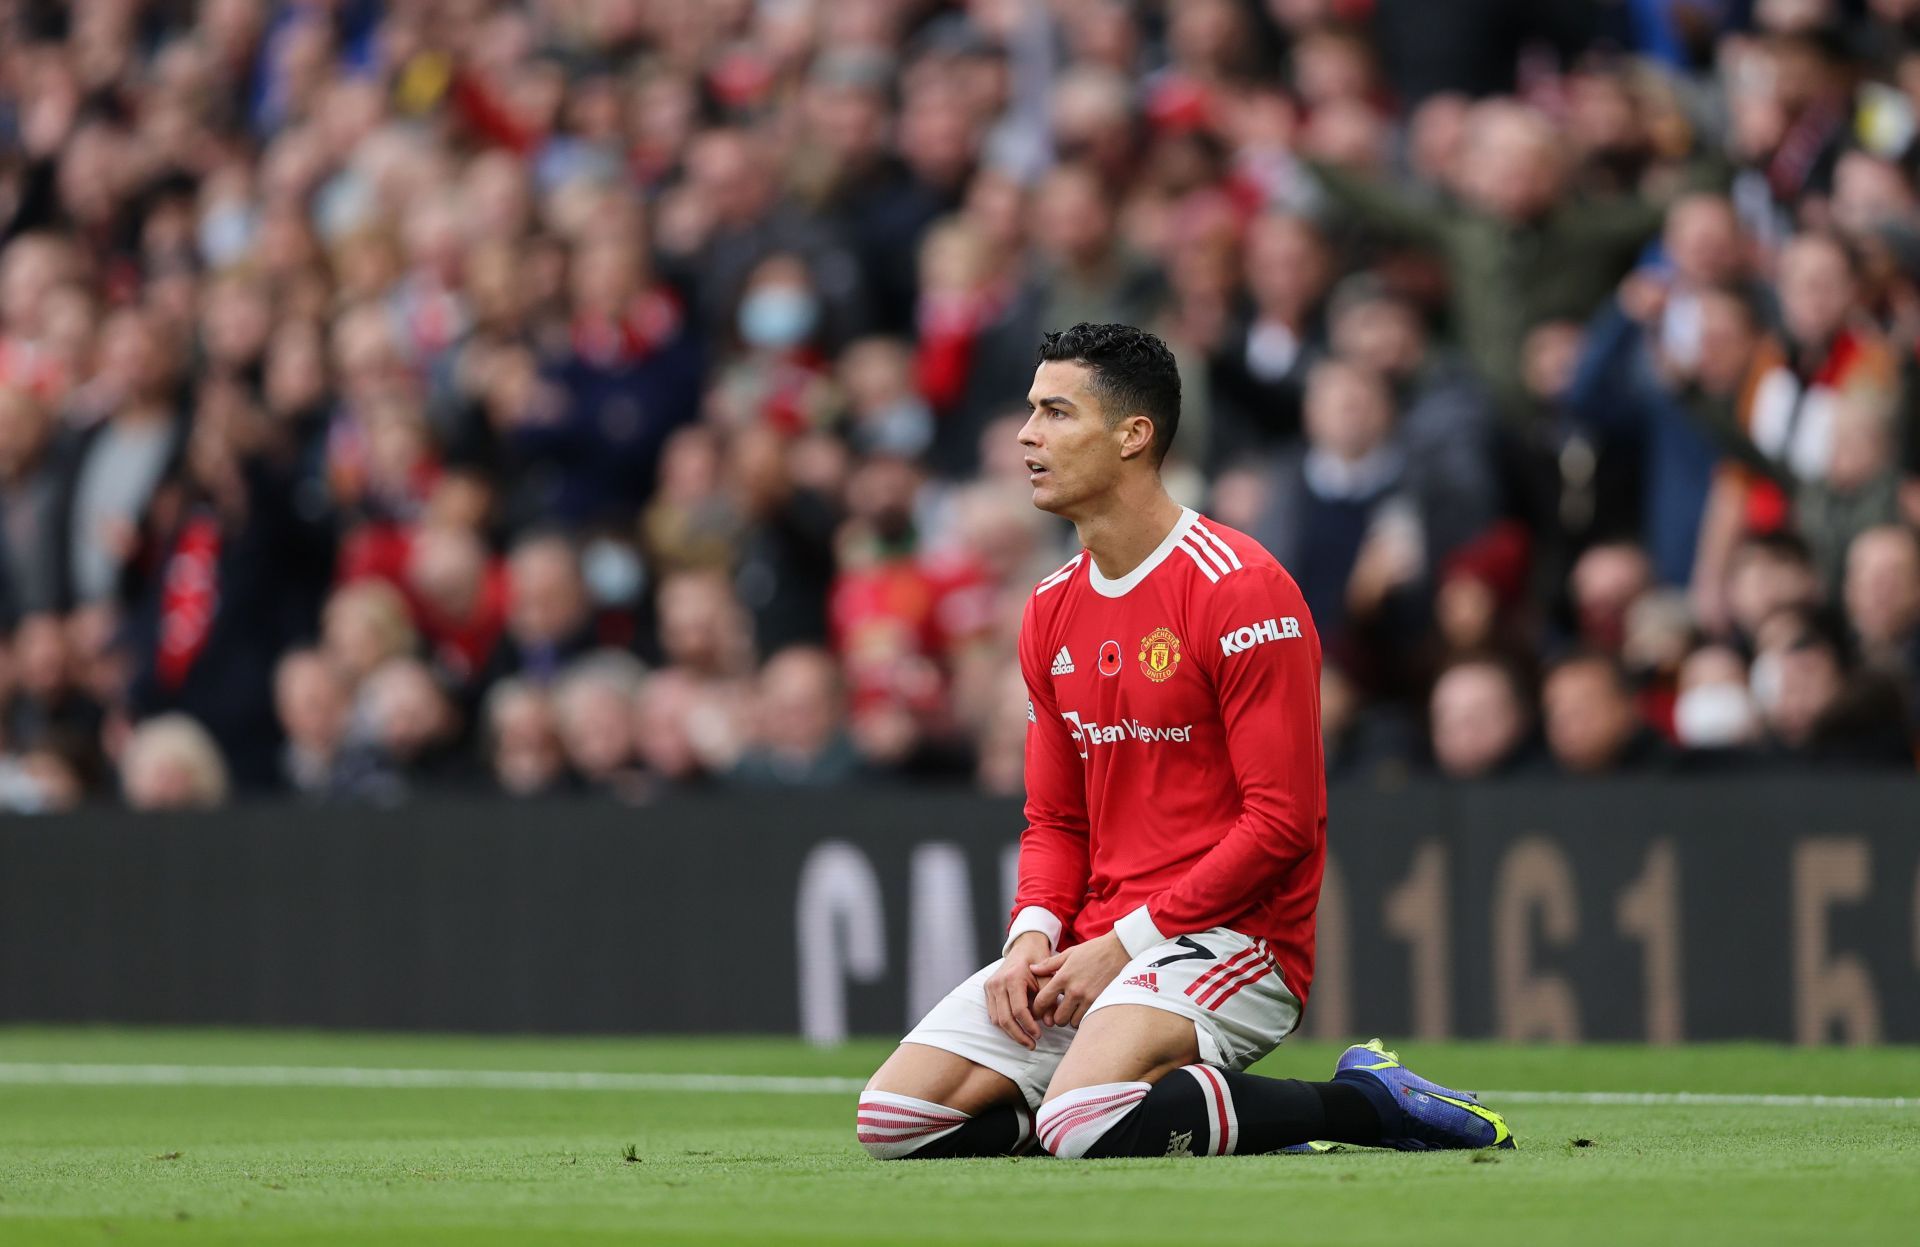 Cristiano Ronaldo has missed a penalty on five occasions for Manchester United